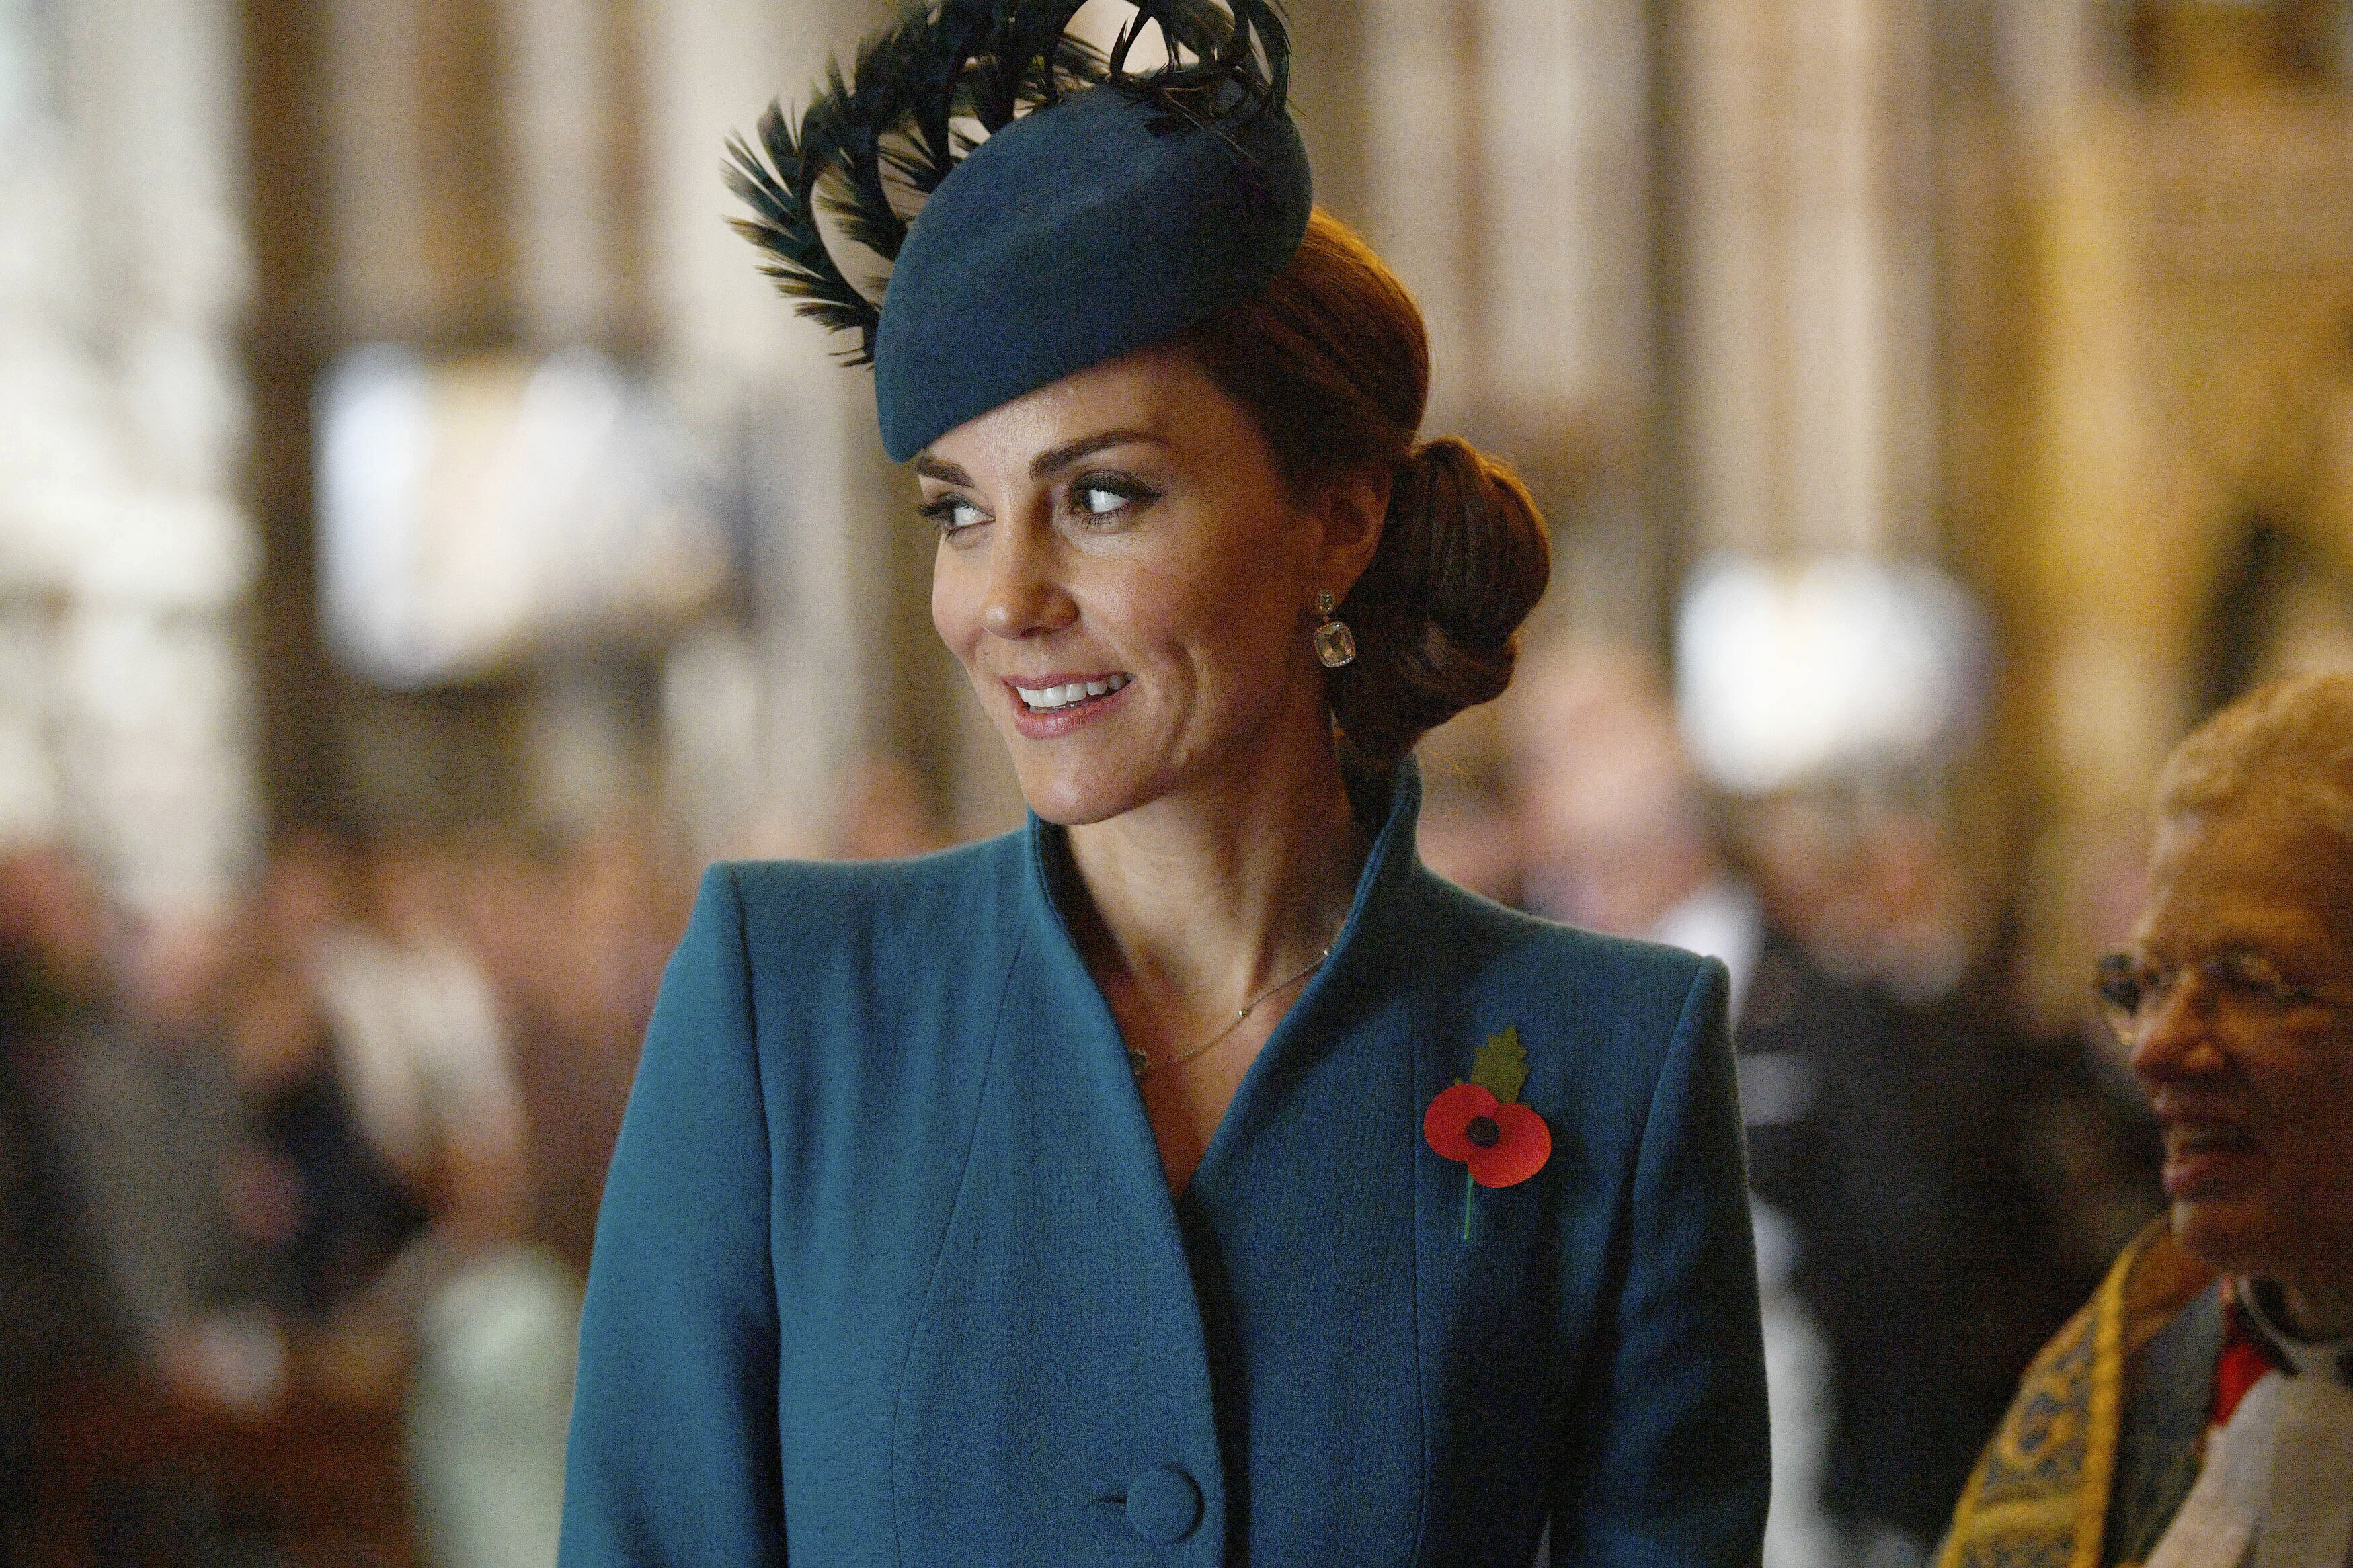 Kate Middleton in teal coat and fascinator with a poppy pin, attending a formal event